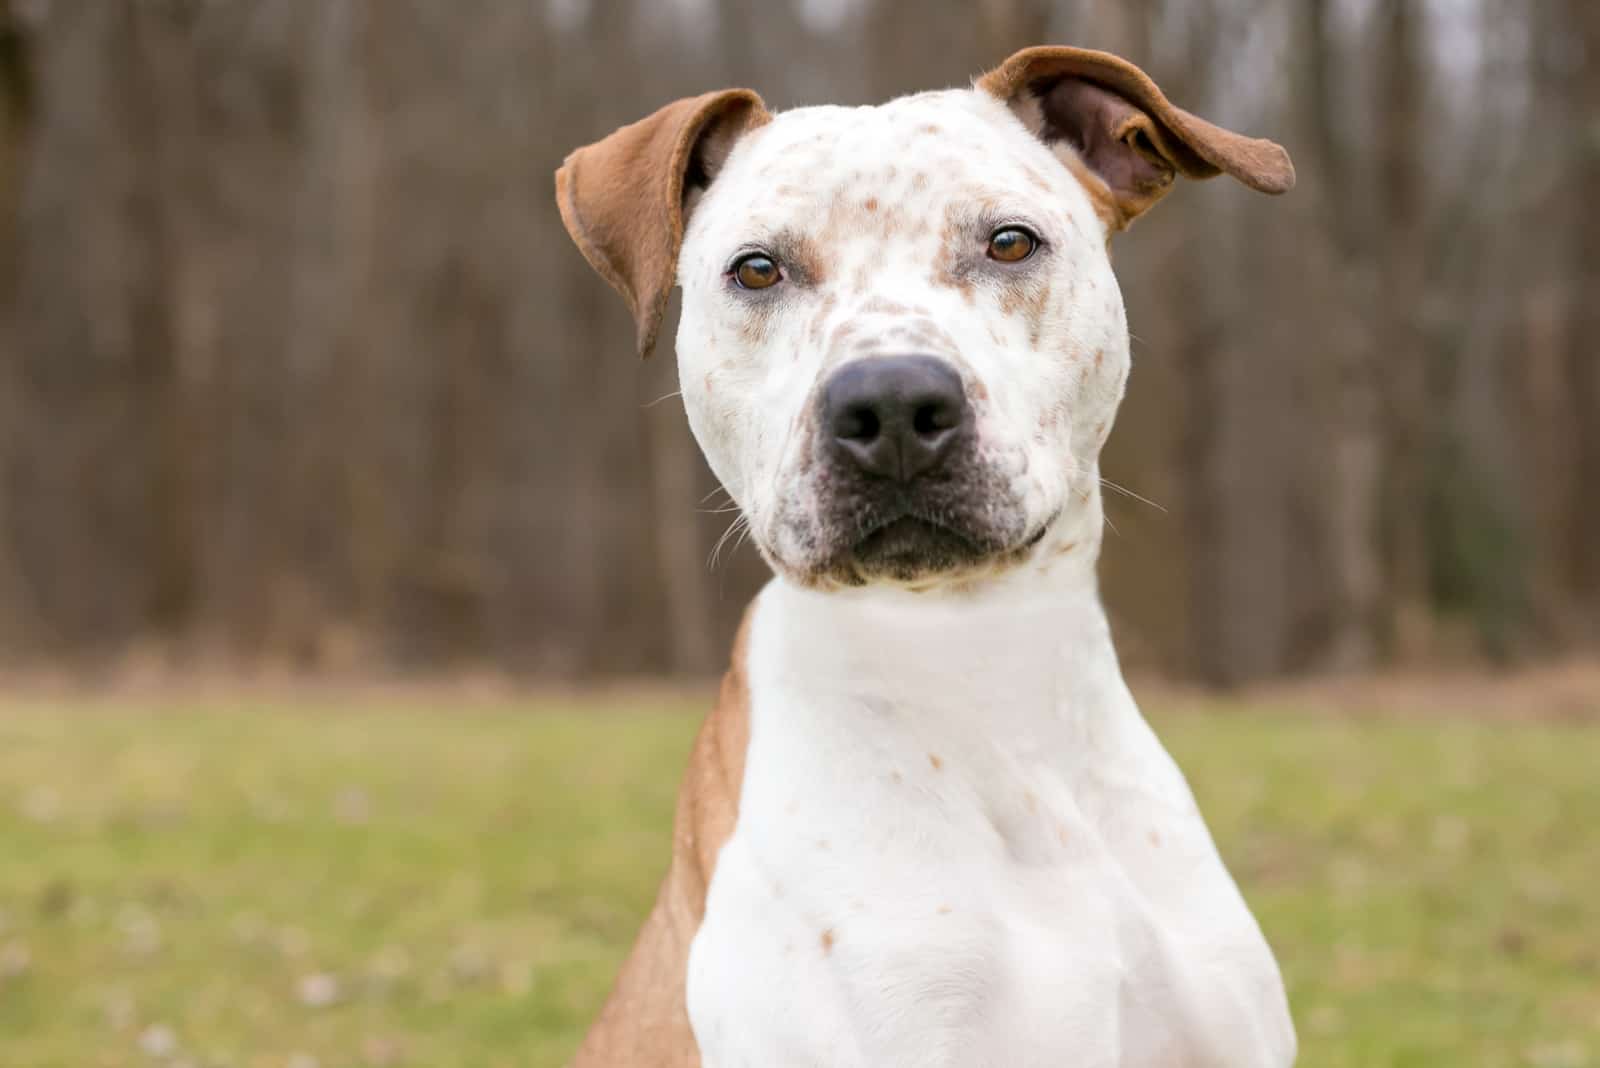 A Catahoula Leopard Dog x Pit Bull Terrier mixed breed dog with freckles on its face